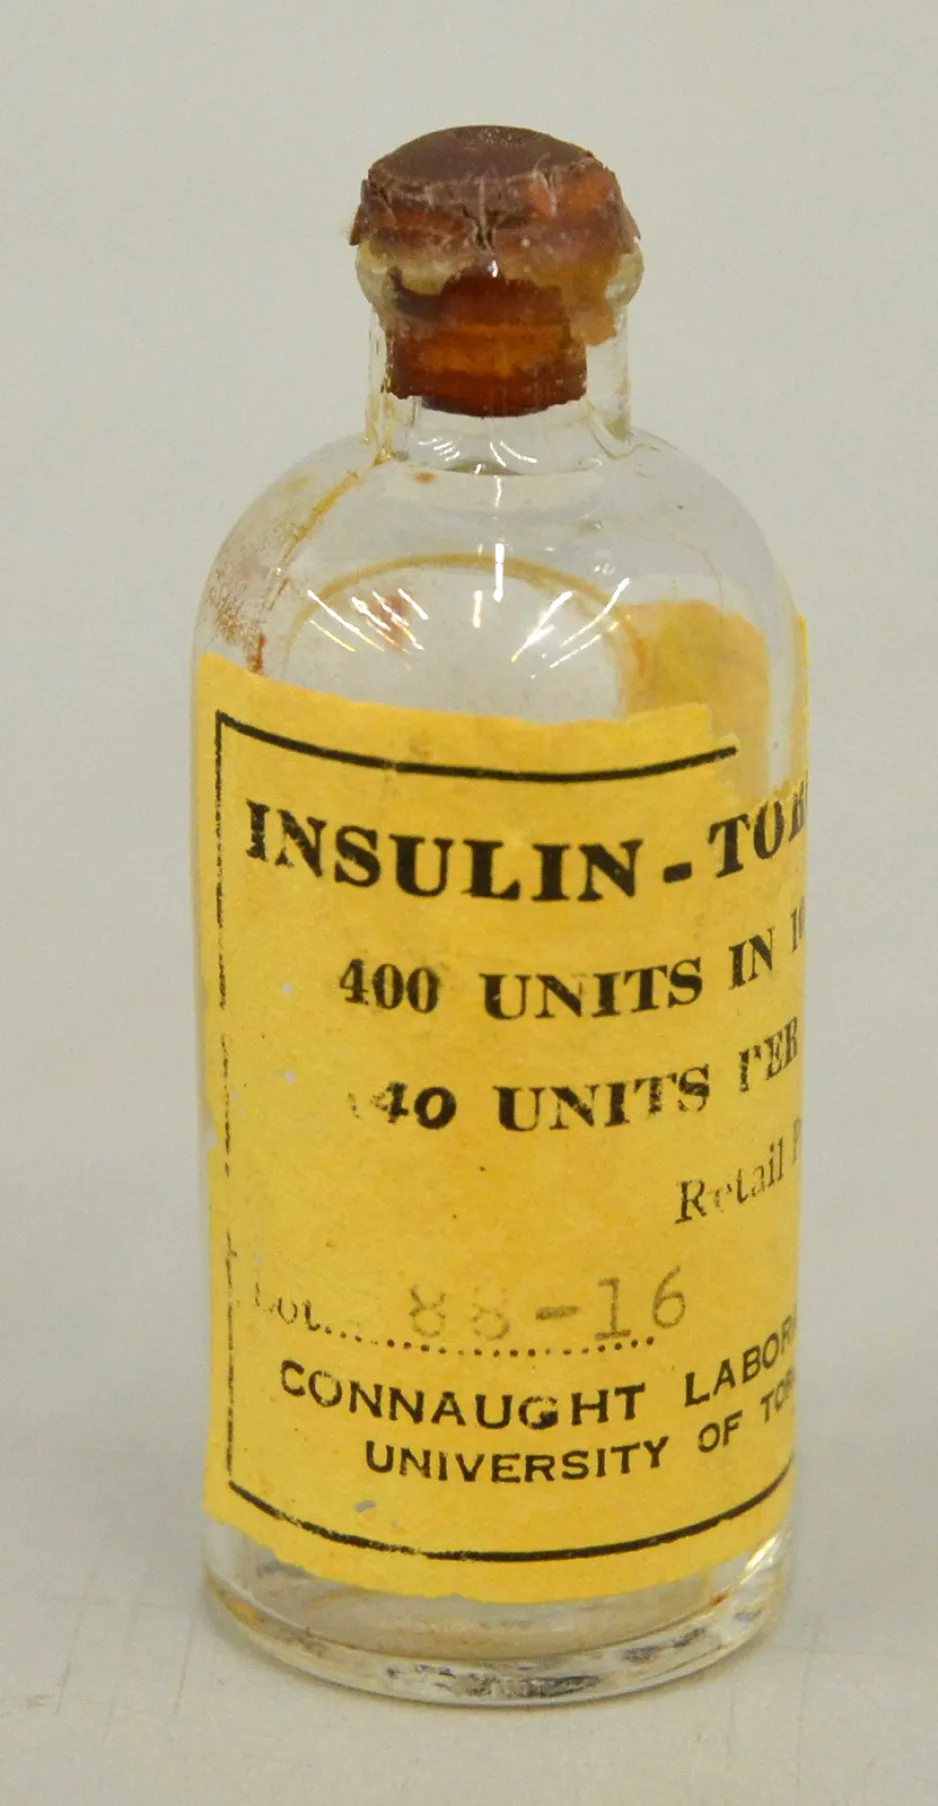 A small glass bottle has a bright yellow label; the word “Insulin” is clearly visible in black lettering. The words “400 units, 40 units” are partially visible at the top of the label, and “Connaught Laboratory, University of Toronto” is partially visible at the bottom of the label.